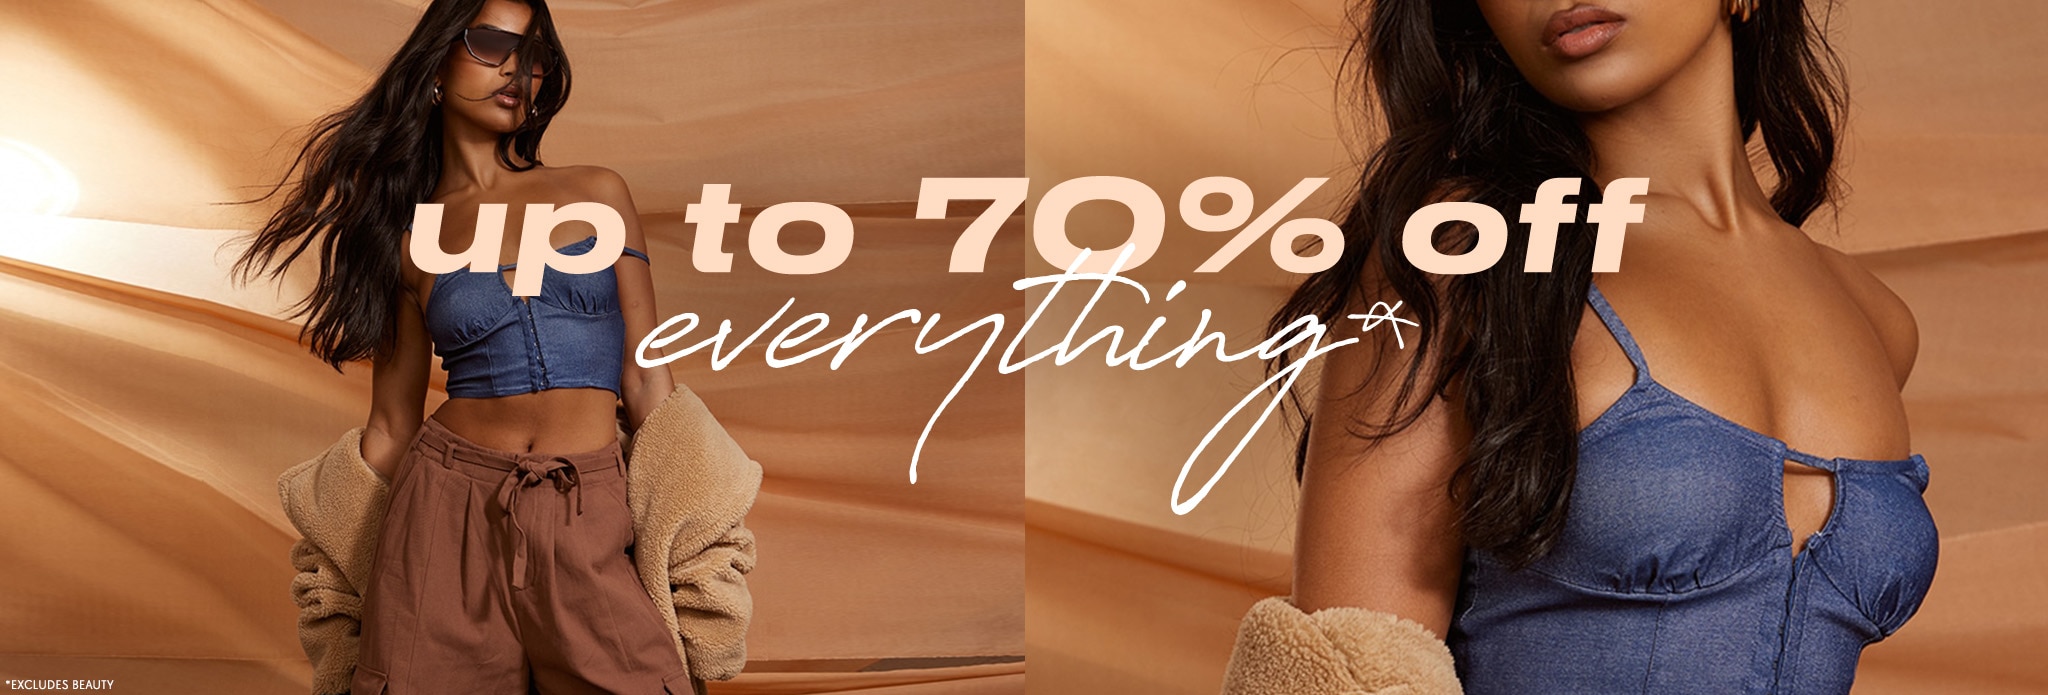 Save up to 75% OFF everything at Prettylittlething